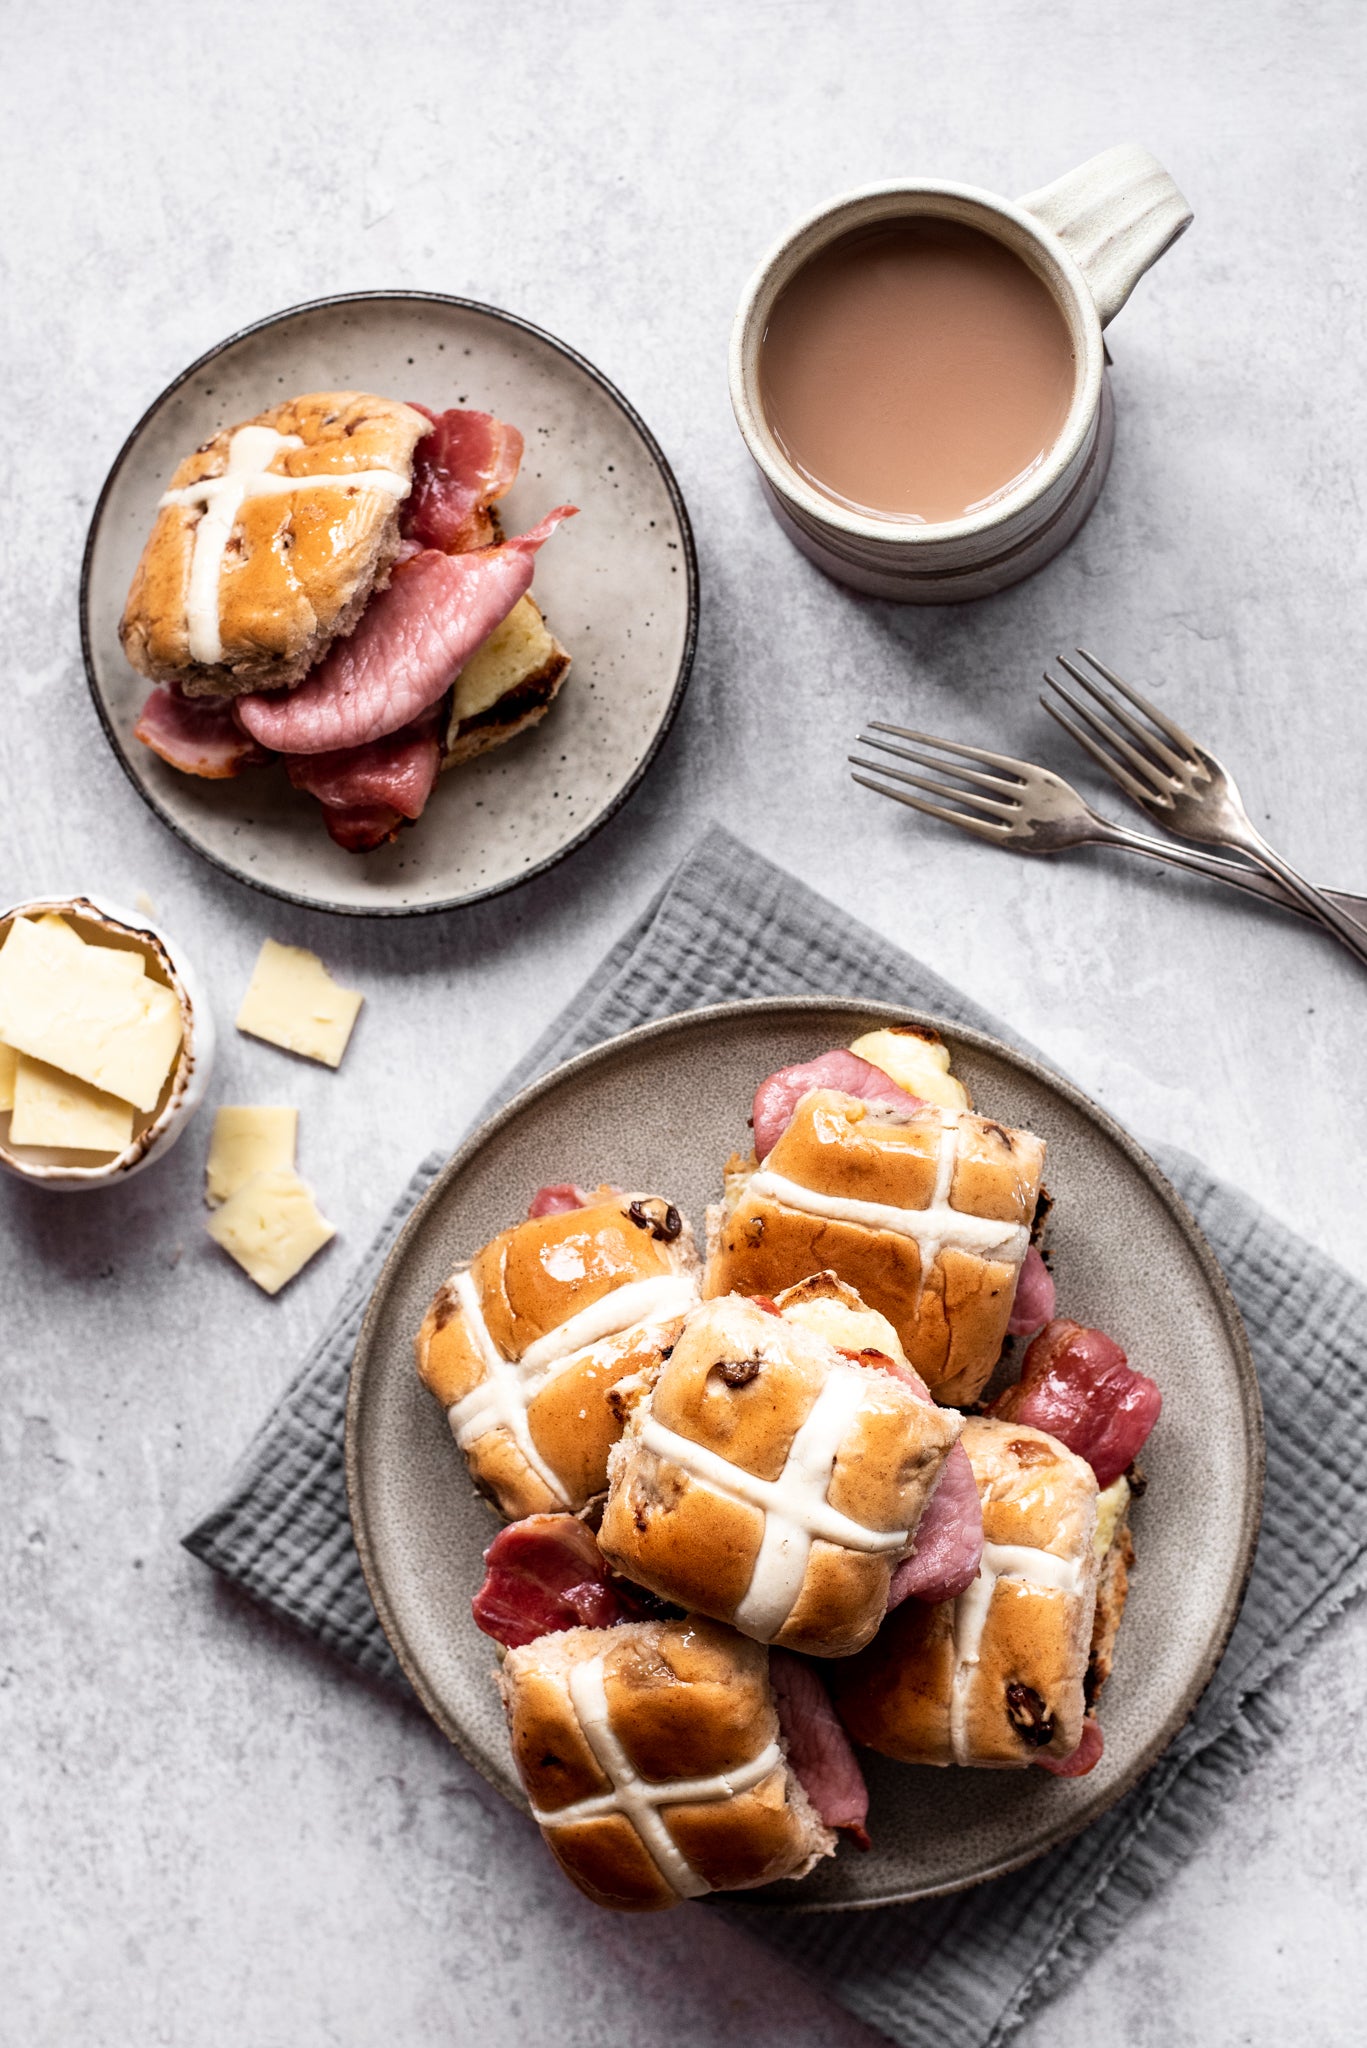 Plate of hot cross buns stacked up. Cup of tea. Two forks. Plate with hot cross bun and bacon